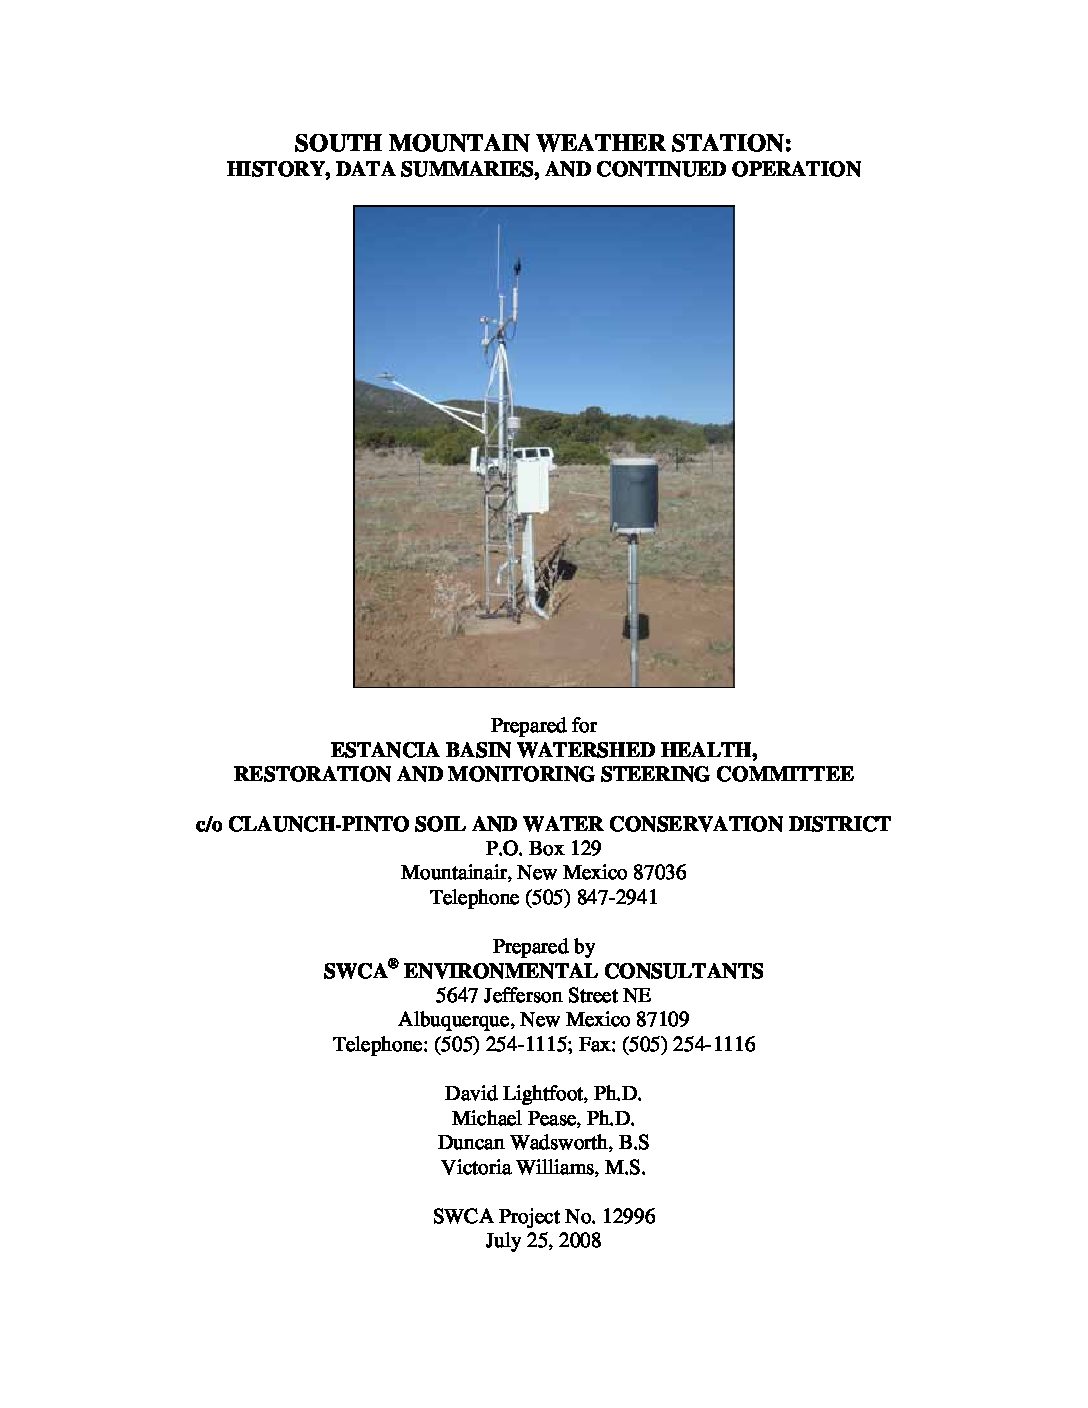 South Mountain Weather Station: History, Data Summaries, and Continued Operation